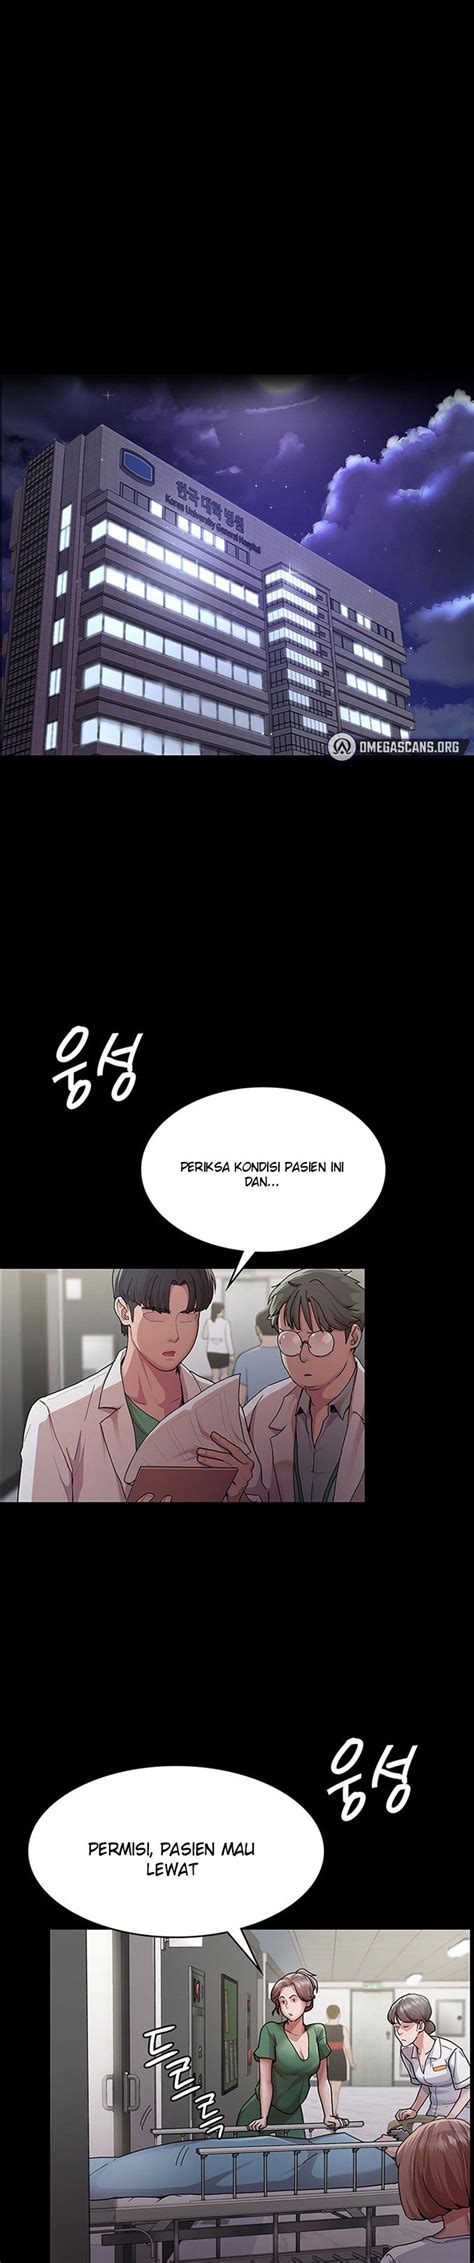 Night hospital manhwa raw. Read Synopsis:Click As soon as the lights go out in the hospital, the nurses find themselves caught in a twisted situation. They desperately fight to maintain their. 